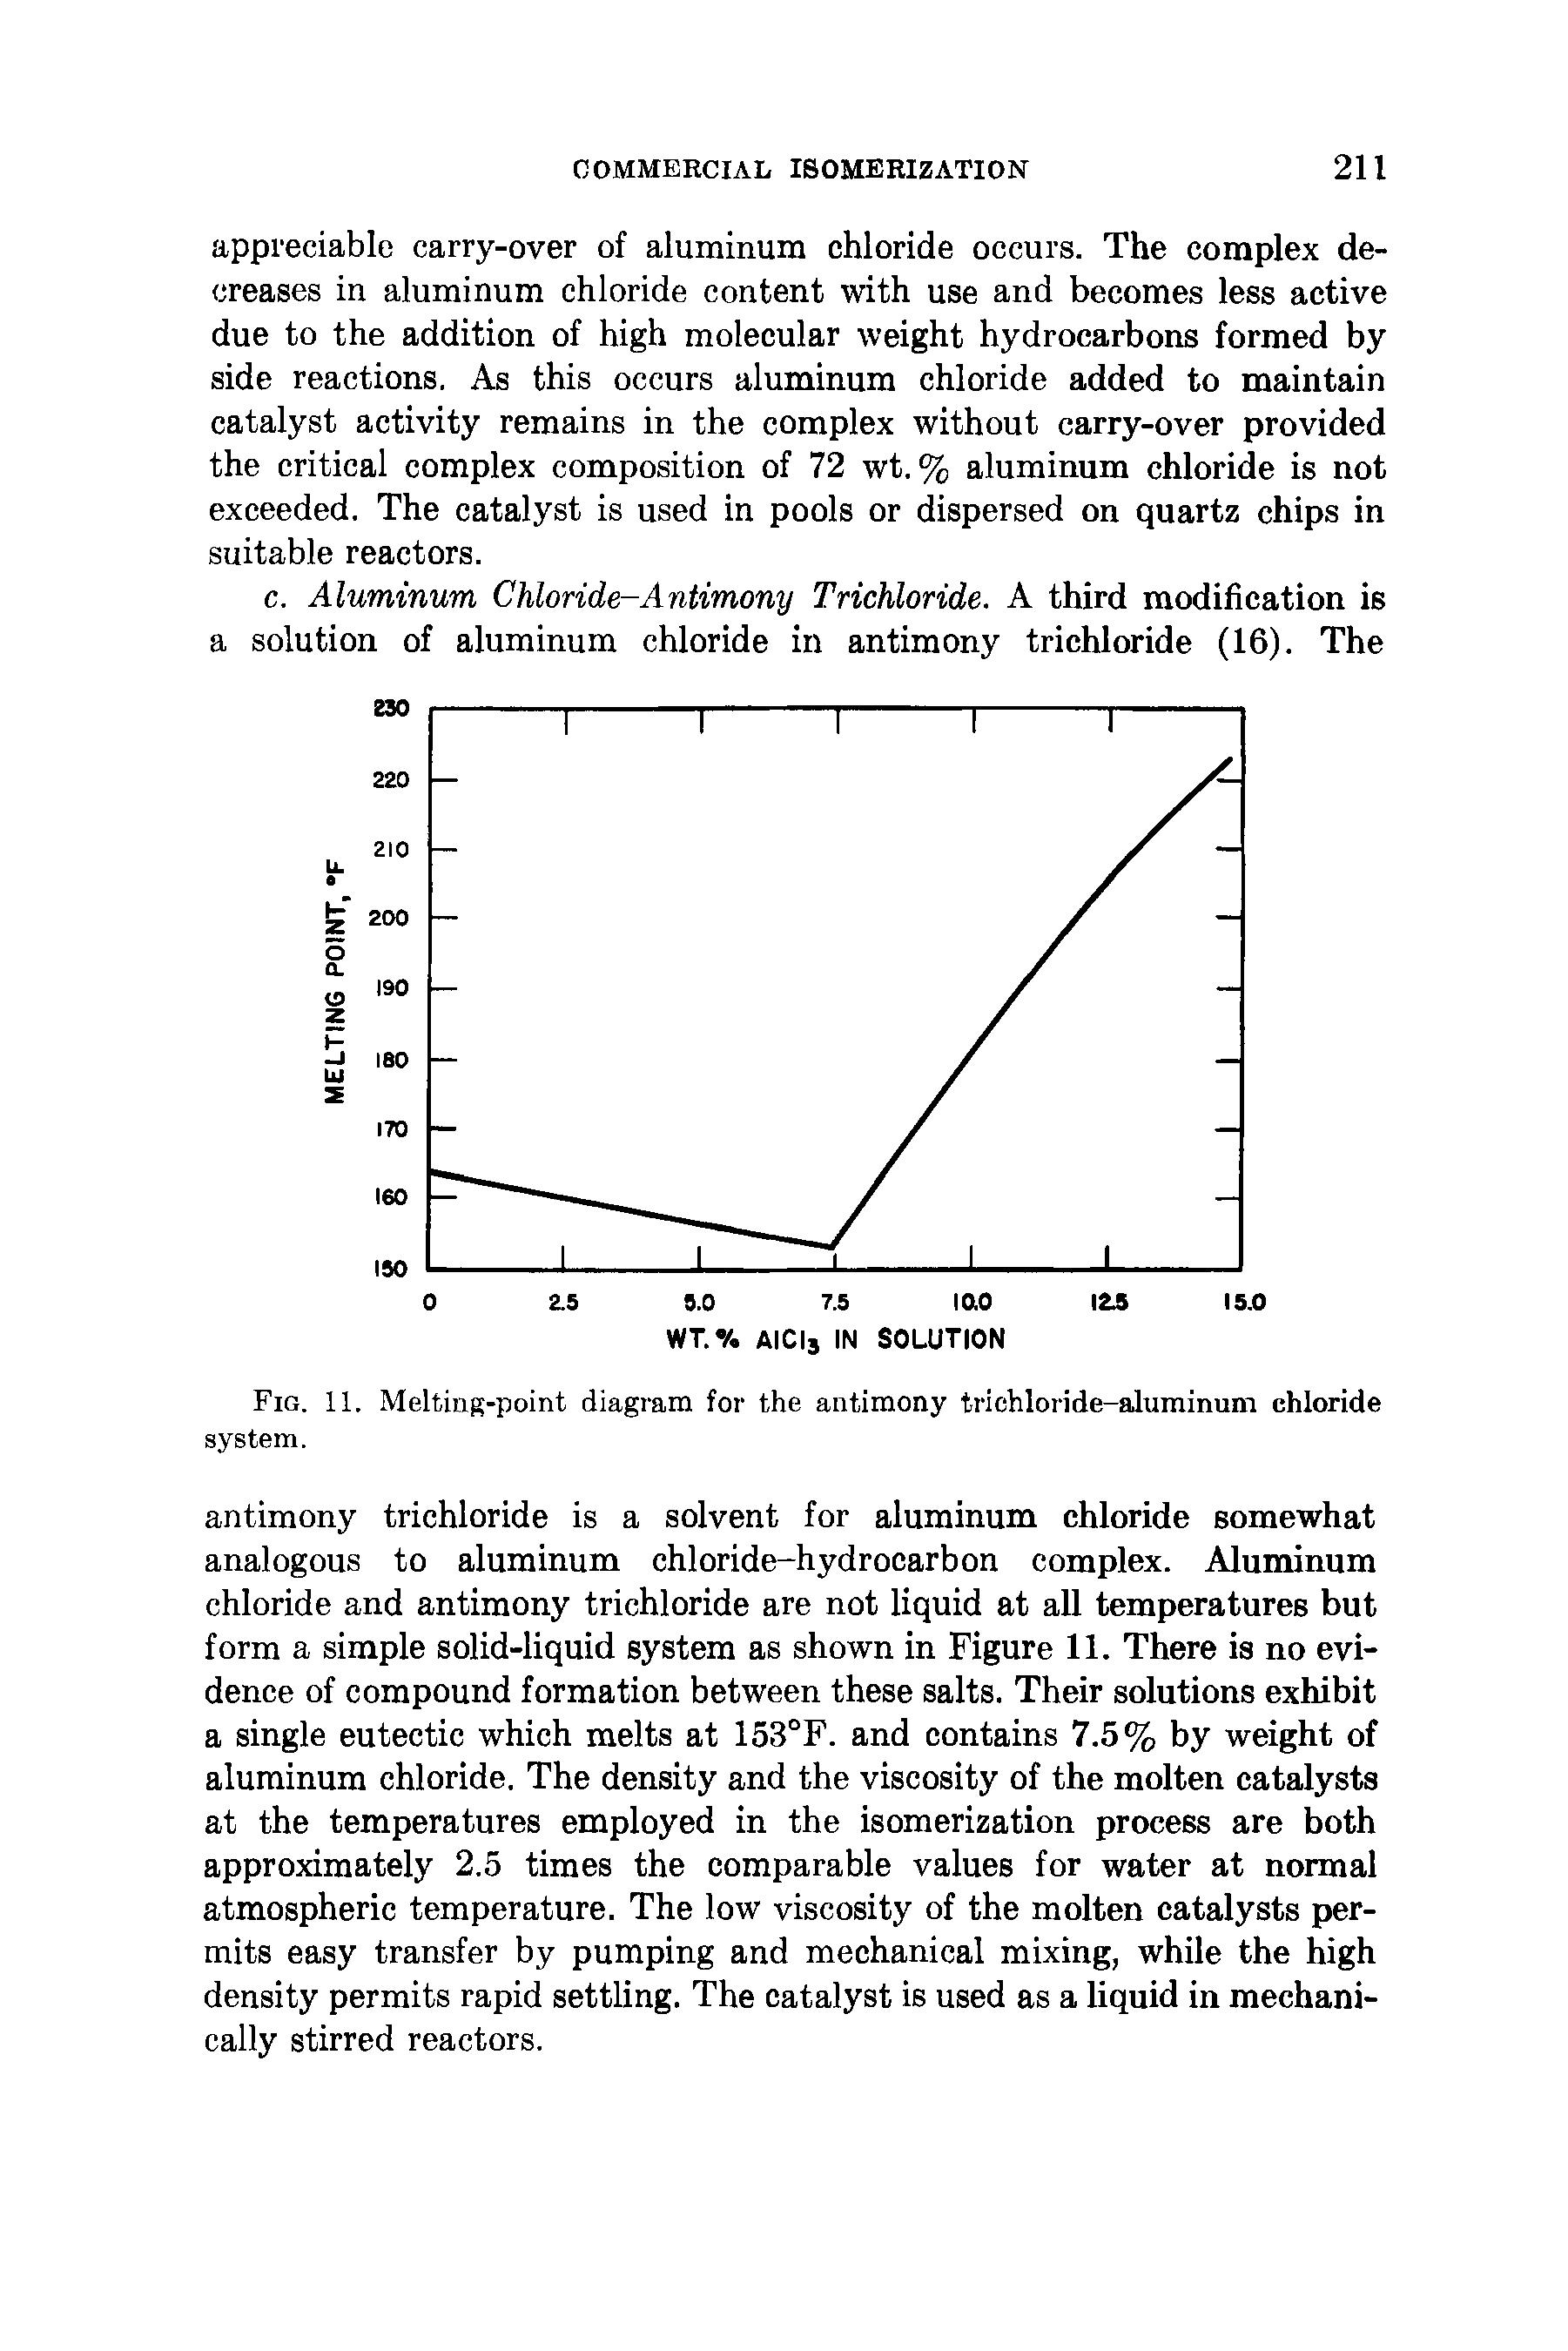 Fig. 11. Melting-point diagram for the antimony trichloride-aluminum chloride system.